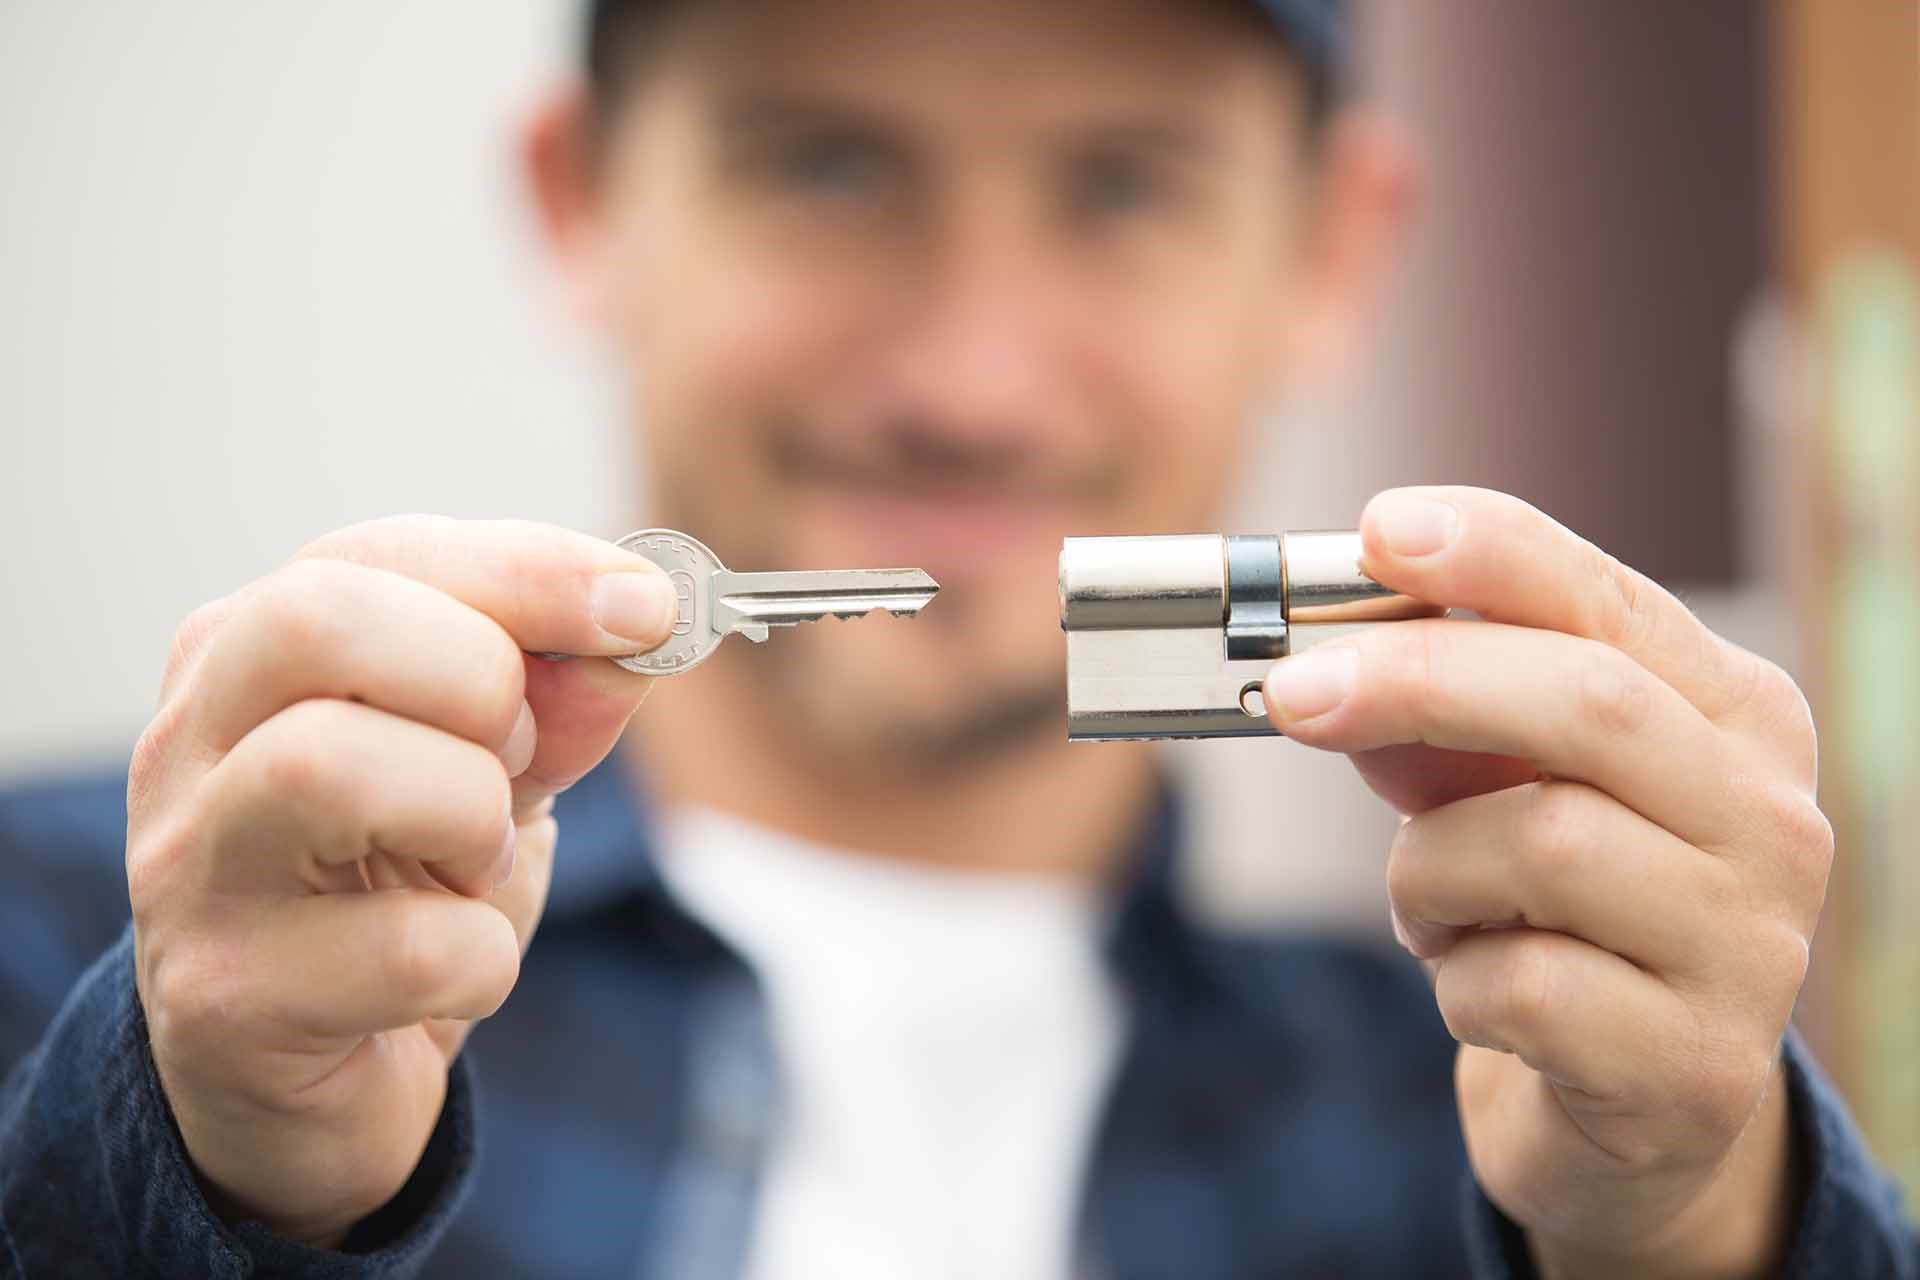 In what ways can a locksmith help businesses?